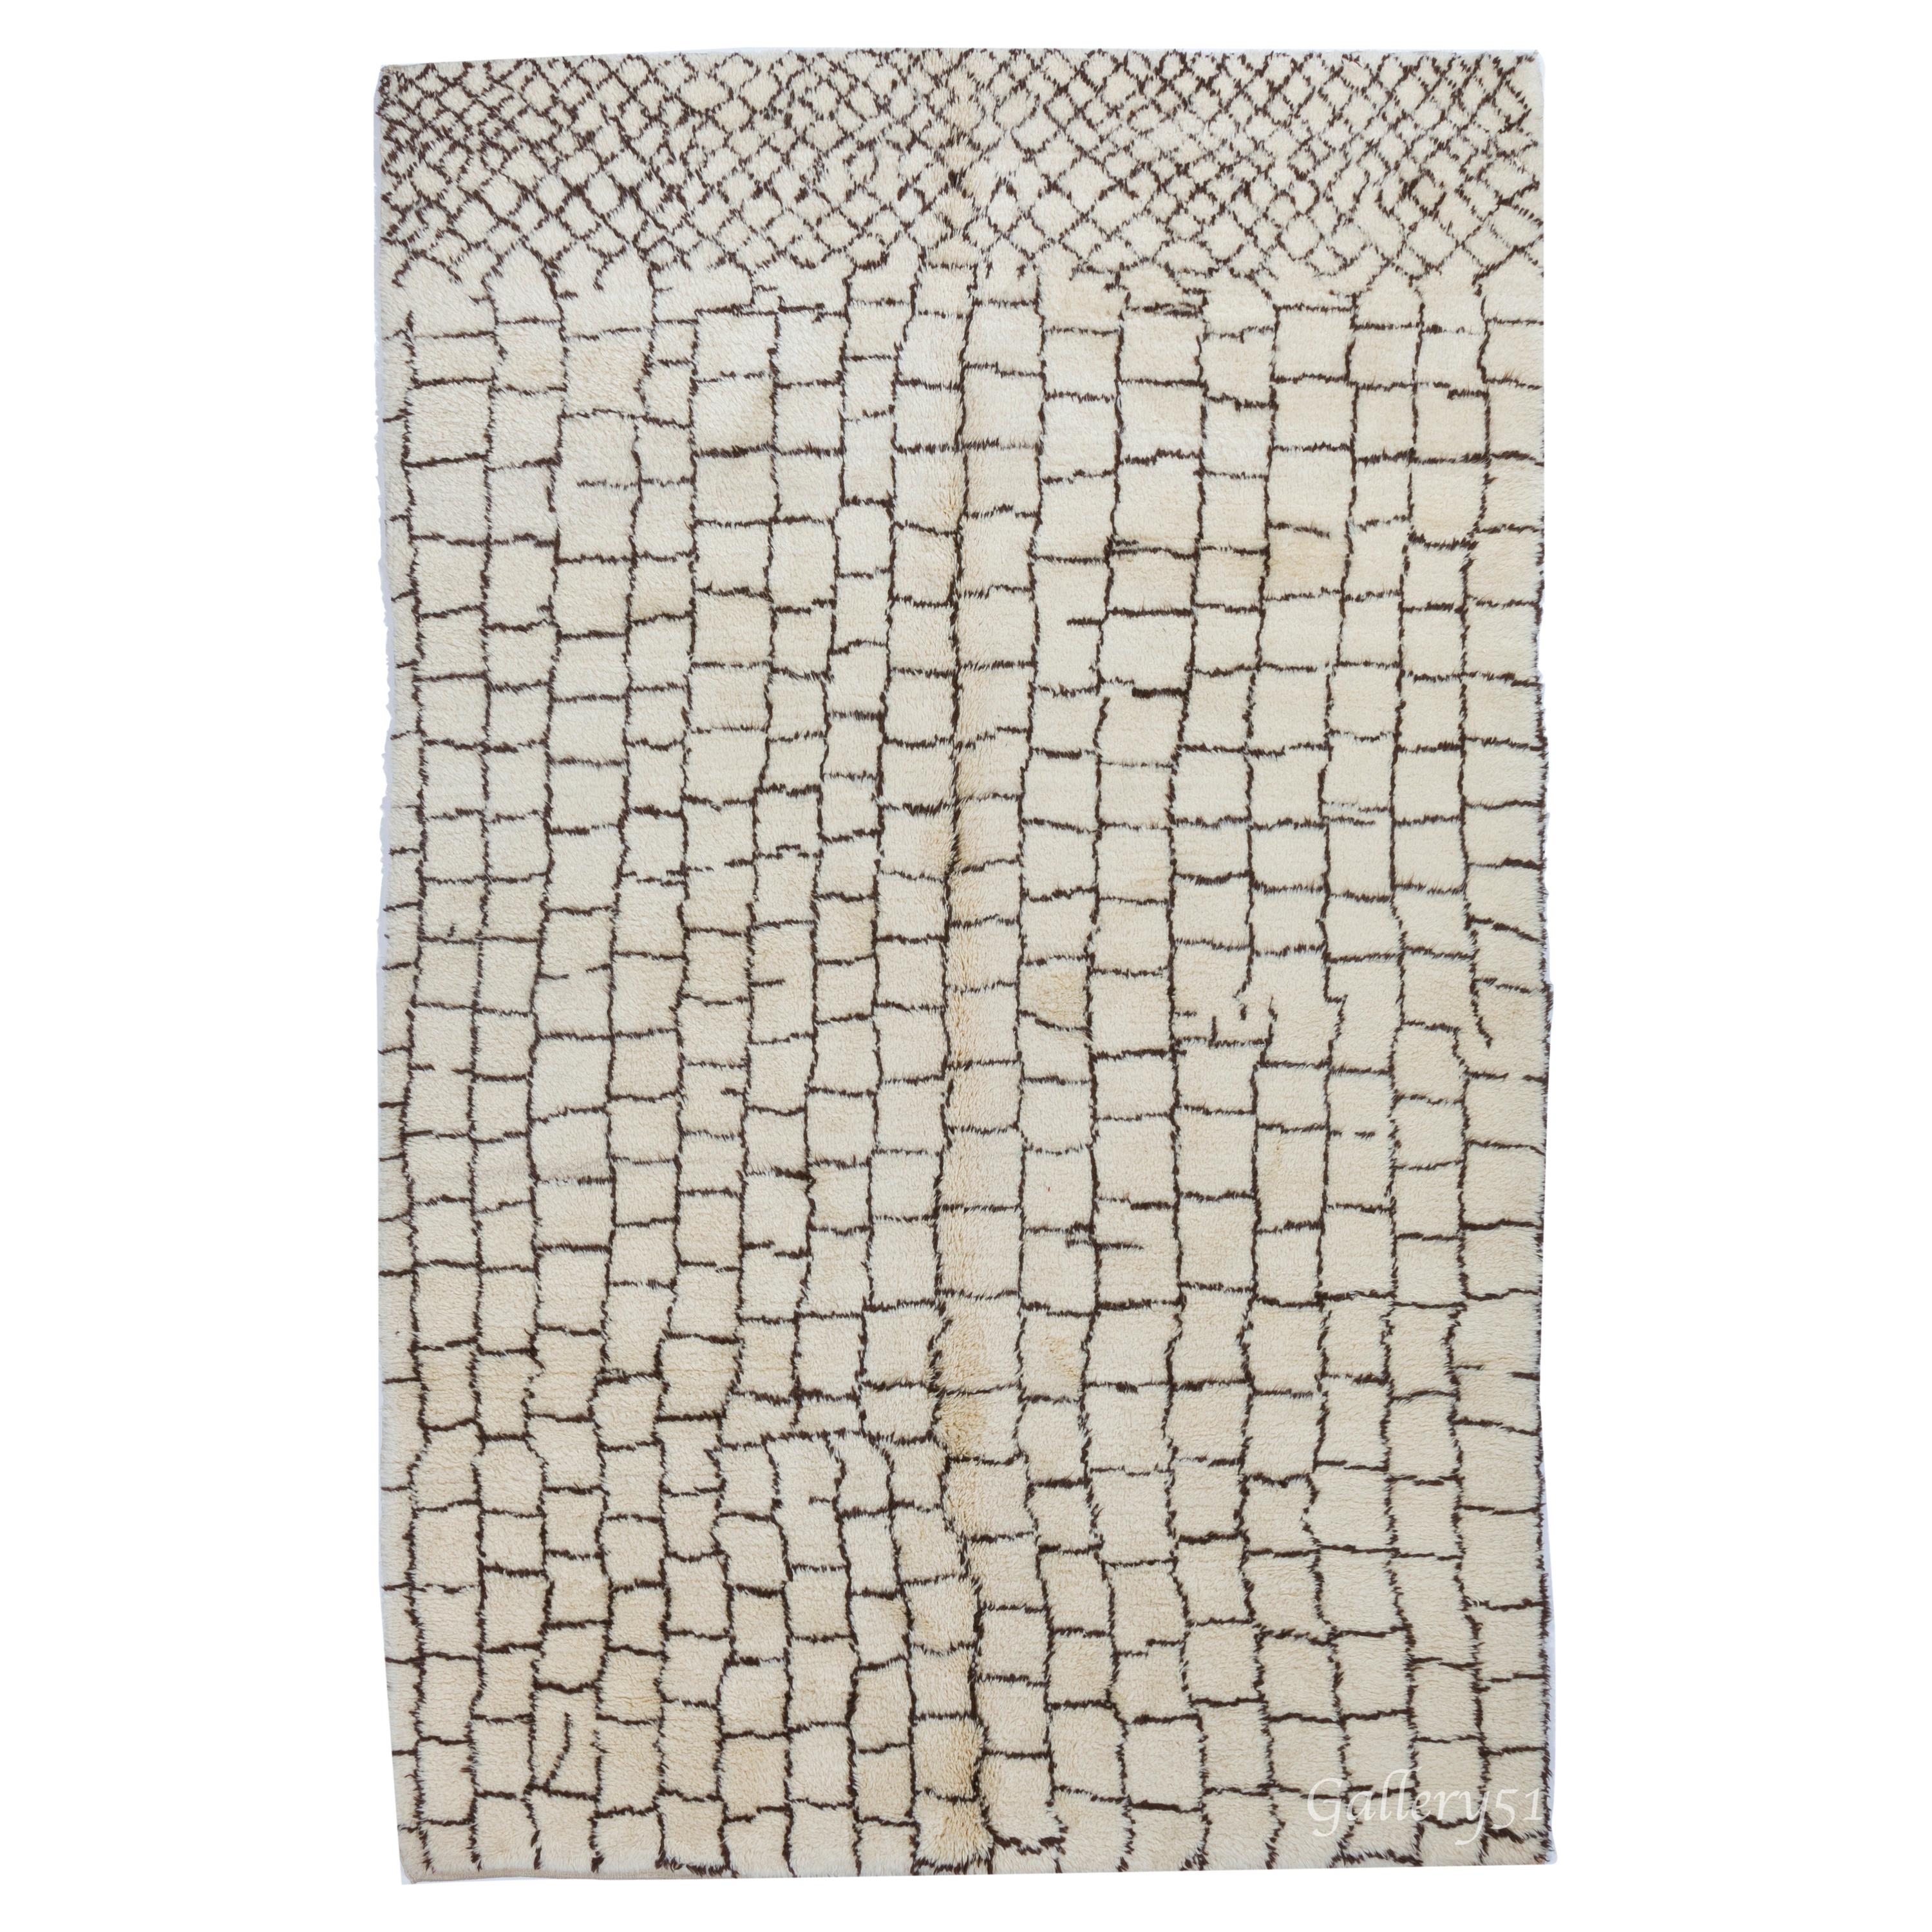 6.4x10.2 ft Modern Moroccan Beni Ourain Berber Tribe Rug. Custom Options Avalb For Sale